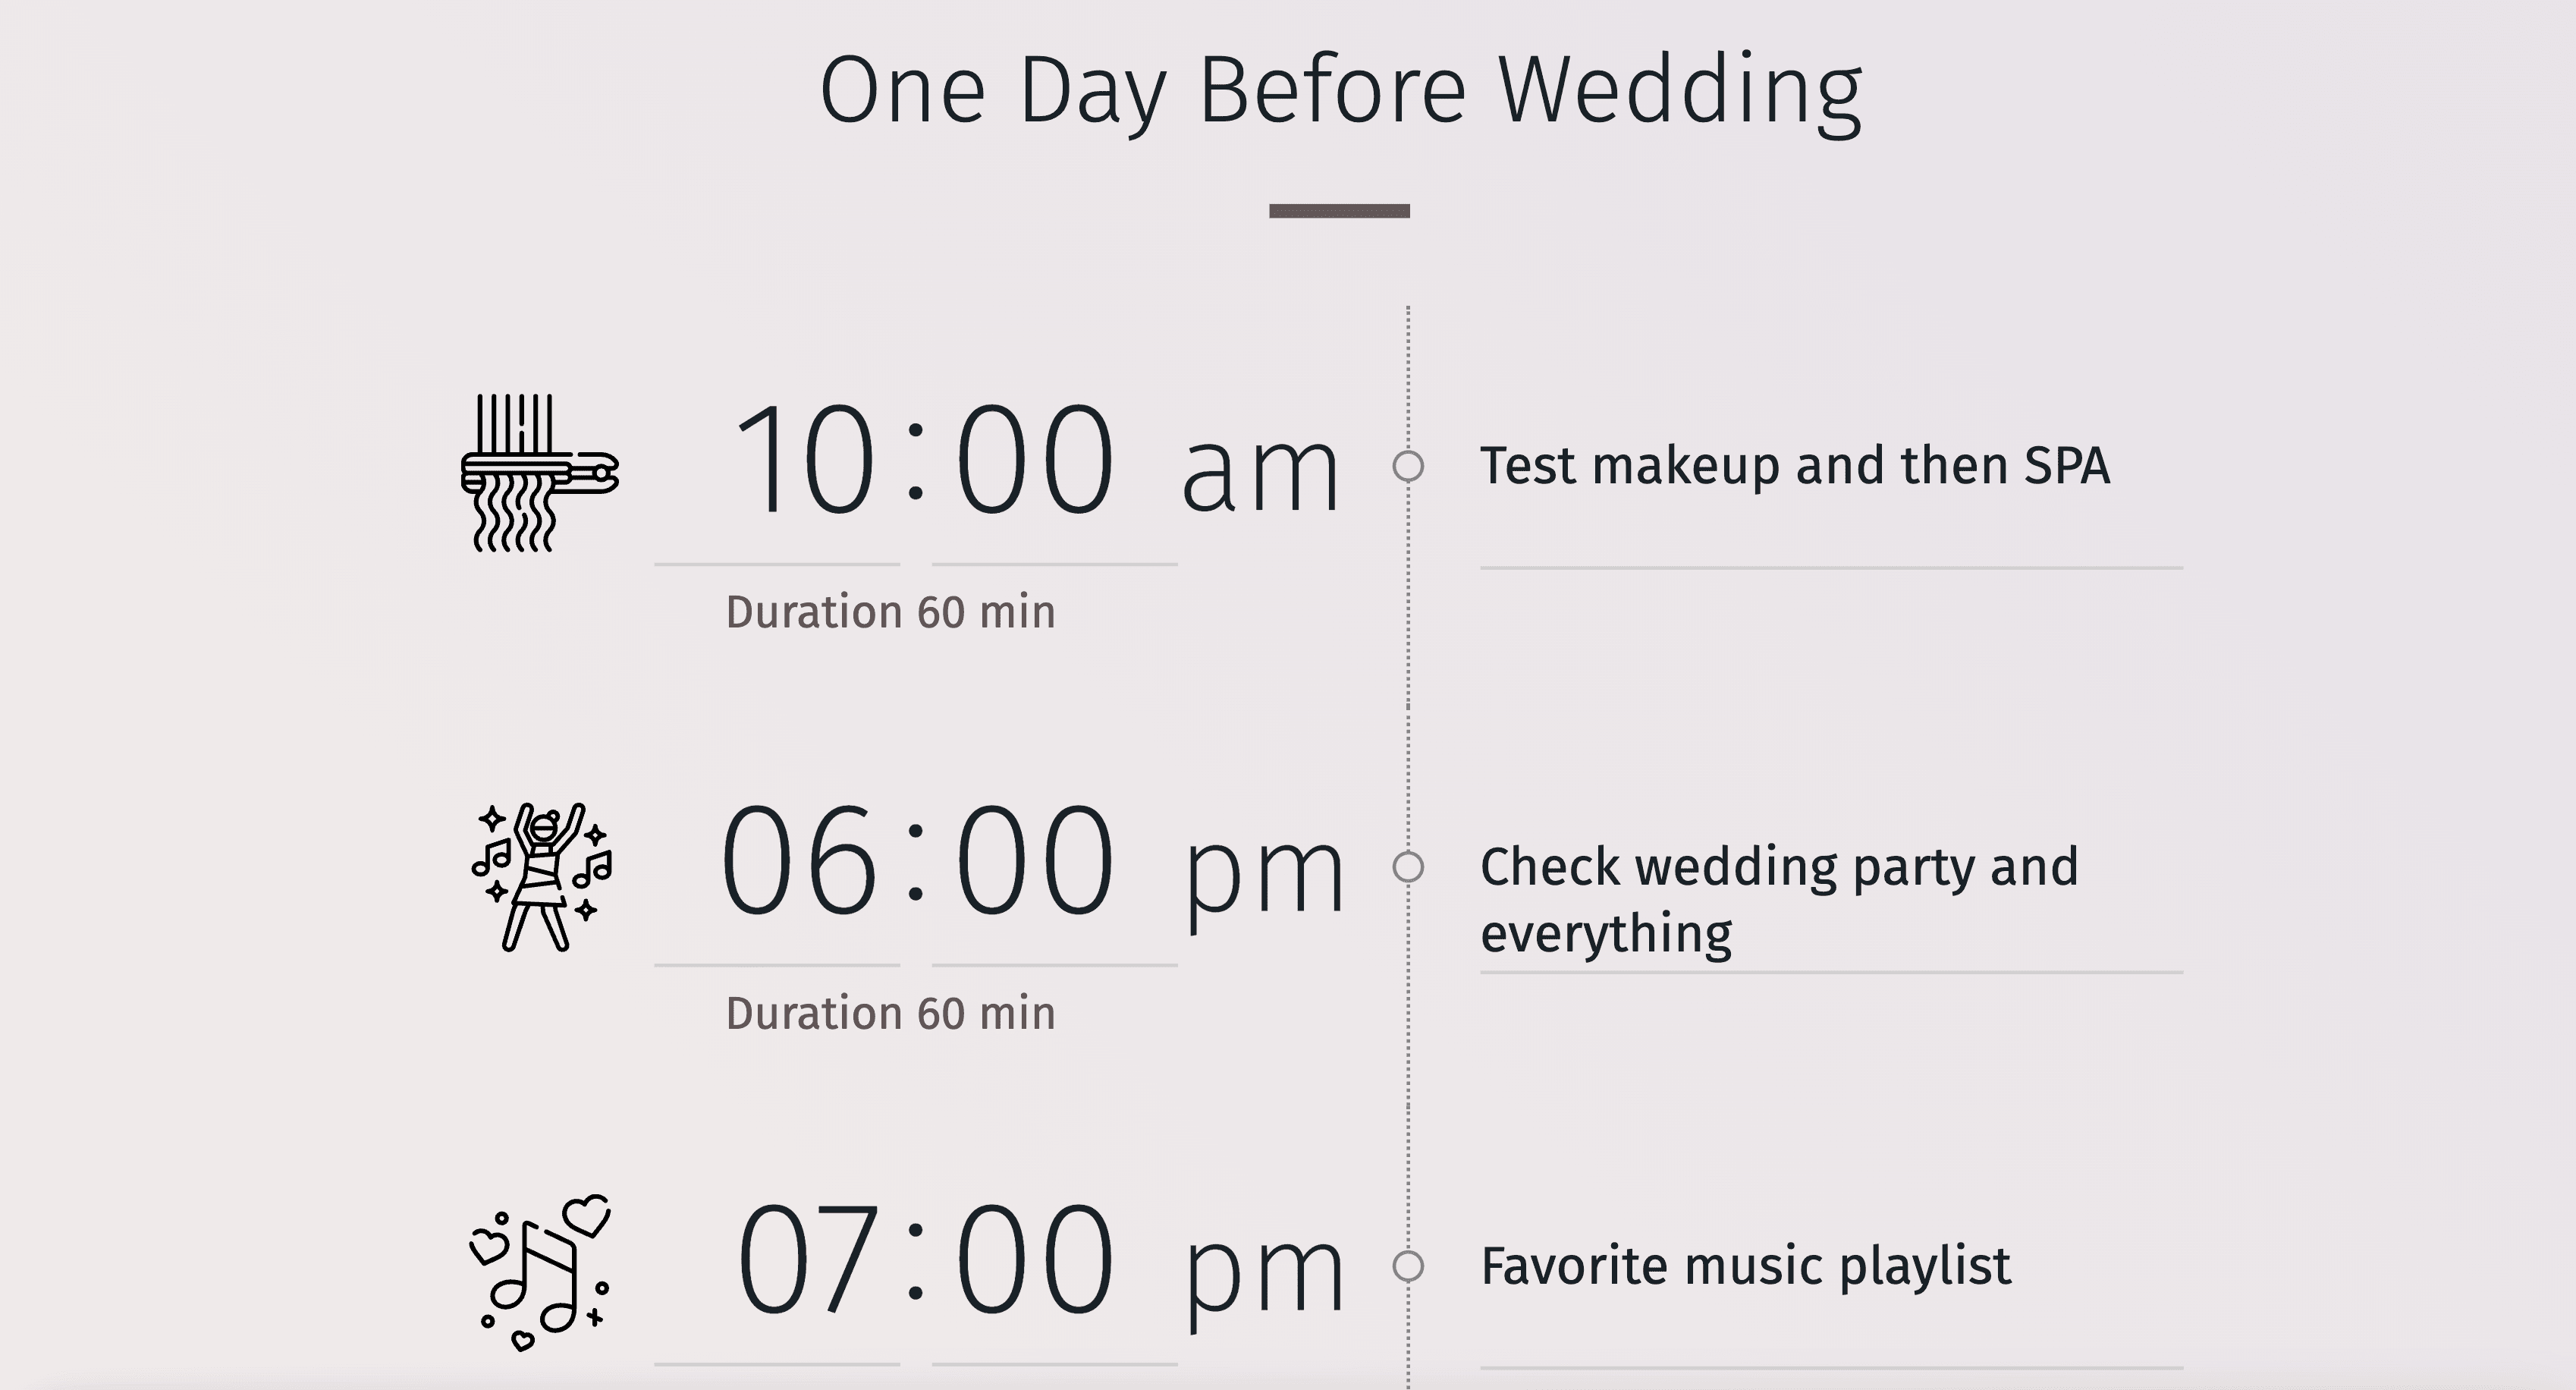 Elegant timeline chart depicting the order of events for a wedding day.